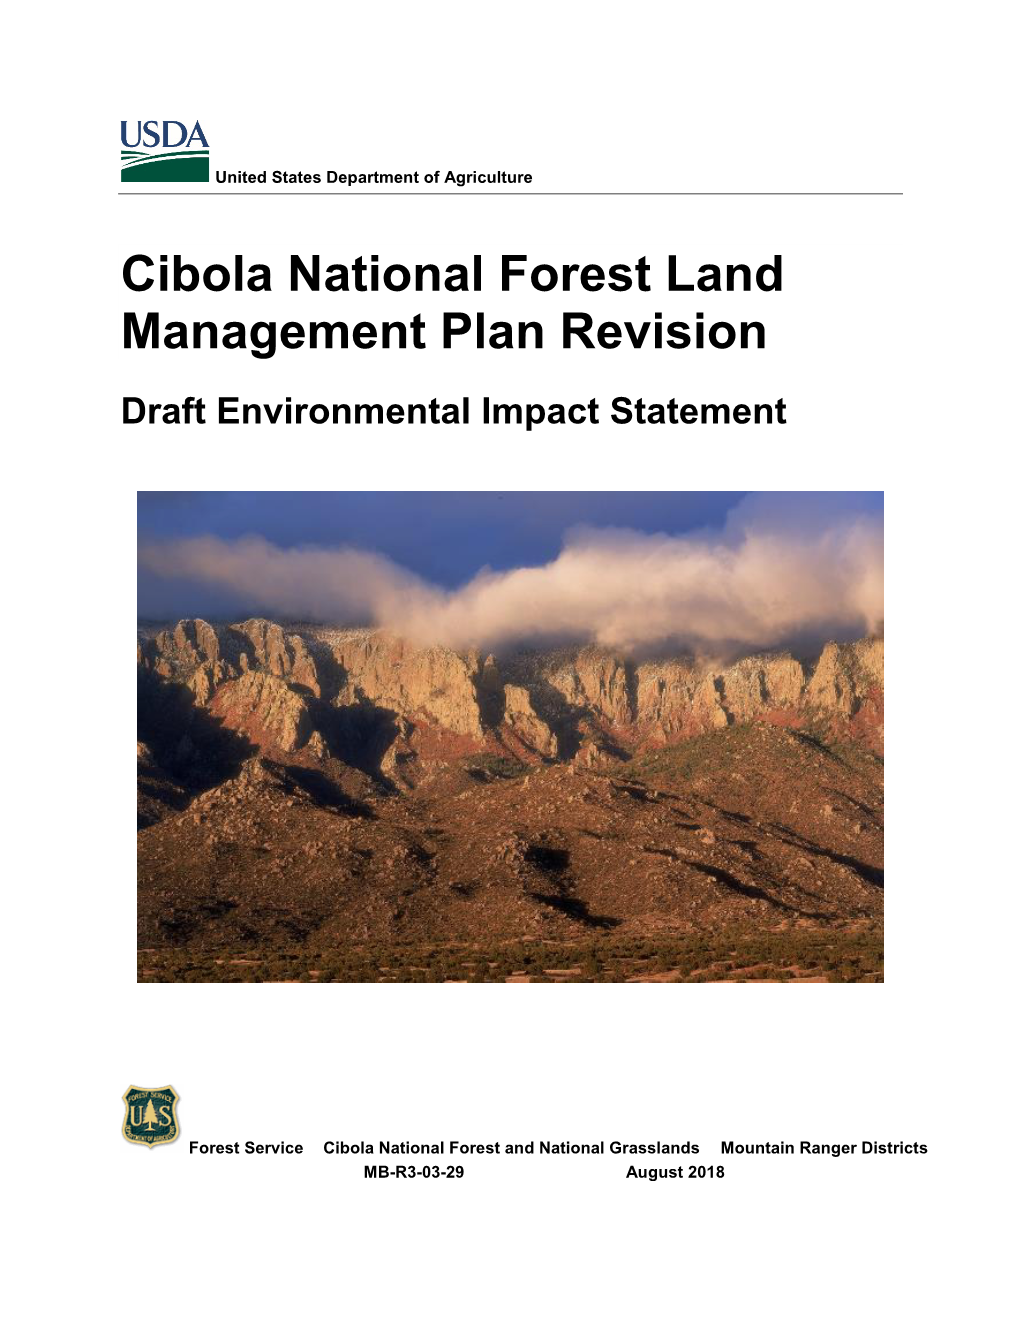 Cibola National Forest Land Management Plan Revision Draft Environmental Impact Statement